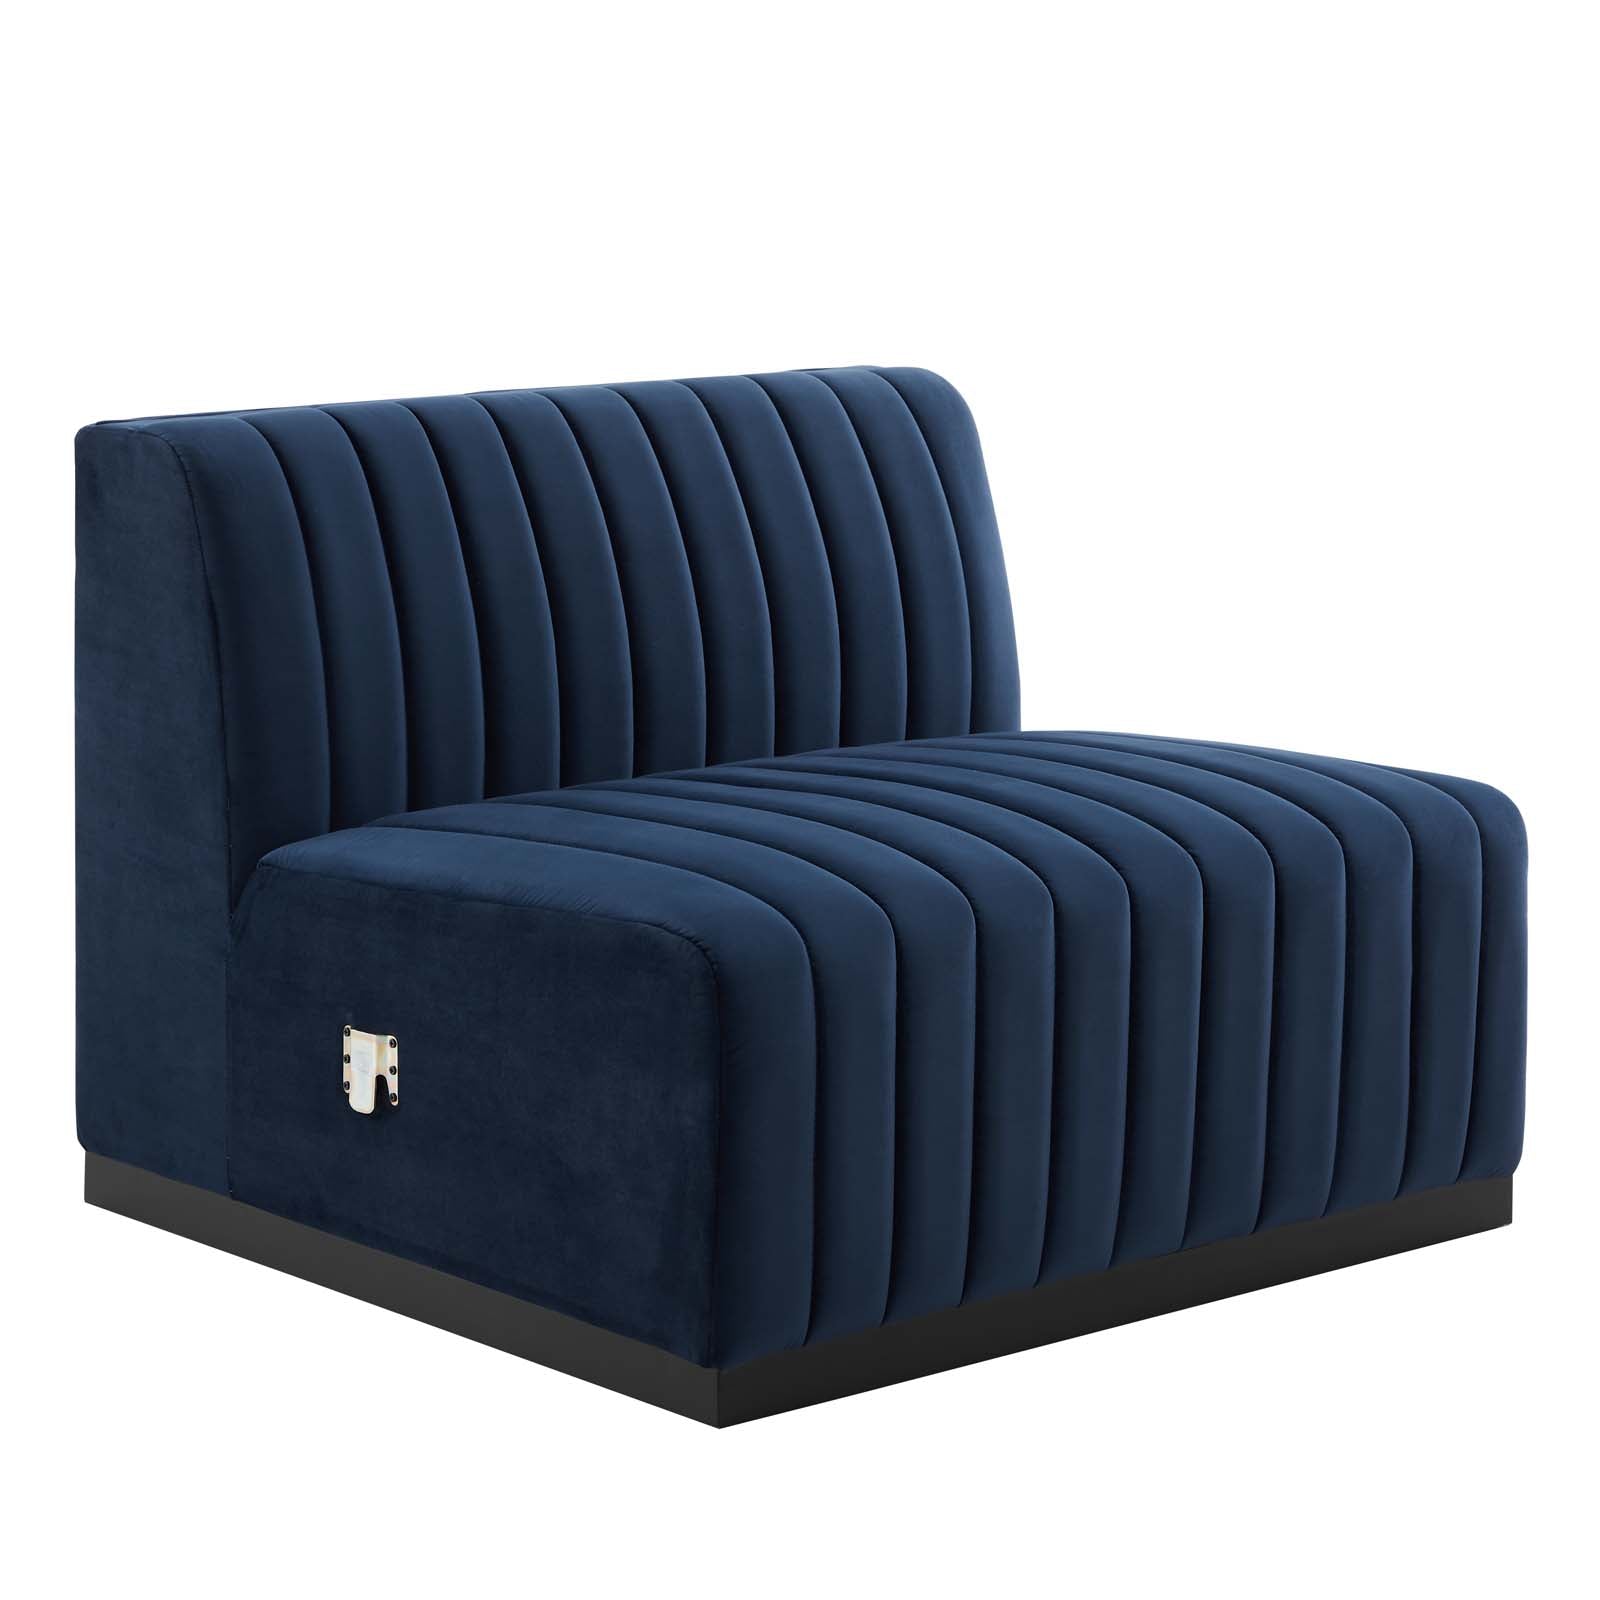 Modway Sectional Sofas - Conjure Channel Tufted Performance Velvet 119"W 5-Piece Sectional Black Midnight Blue